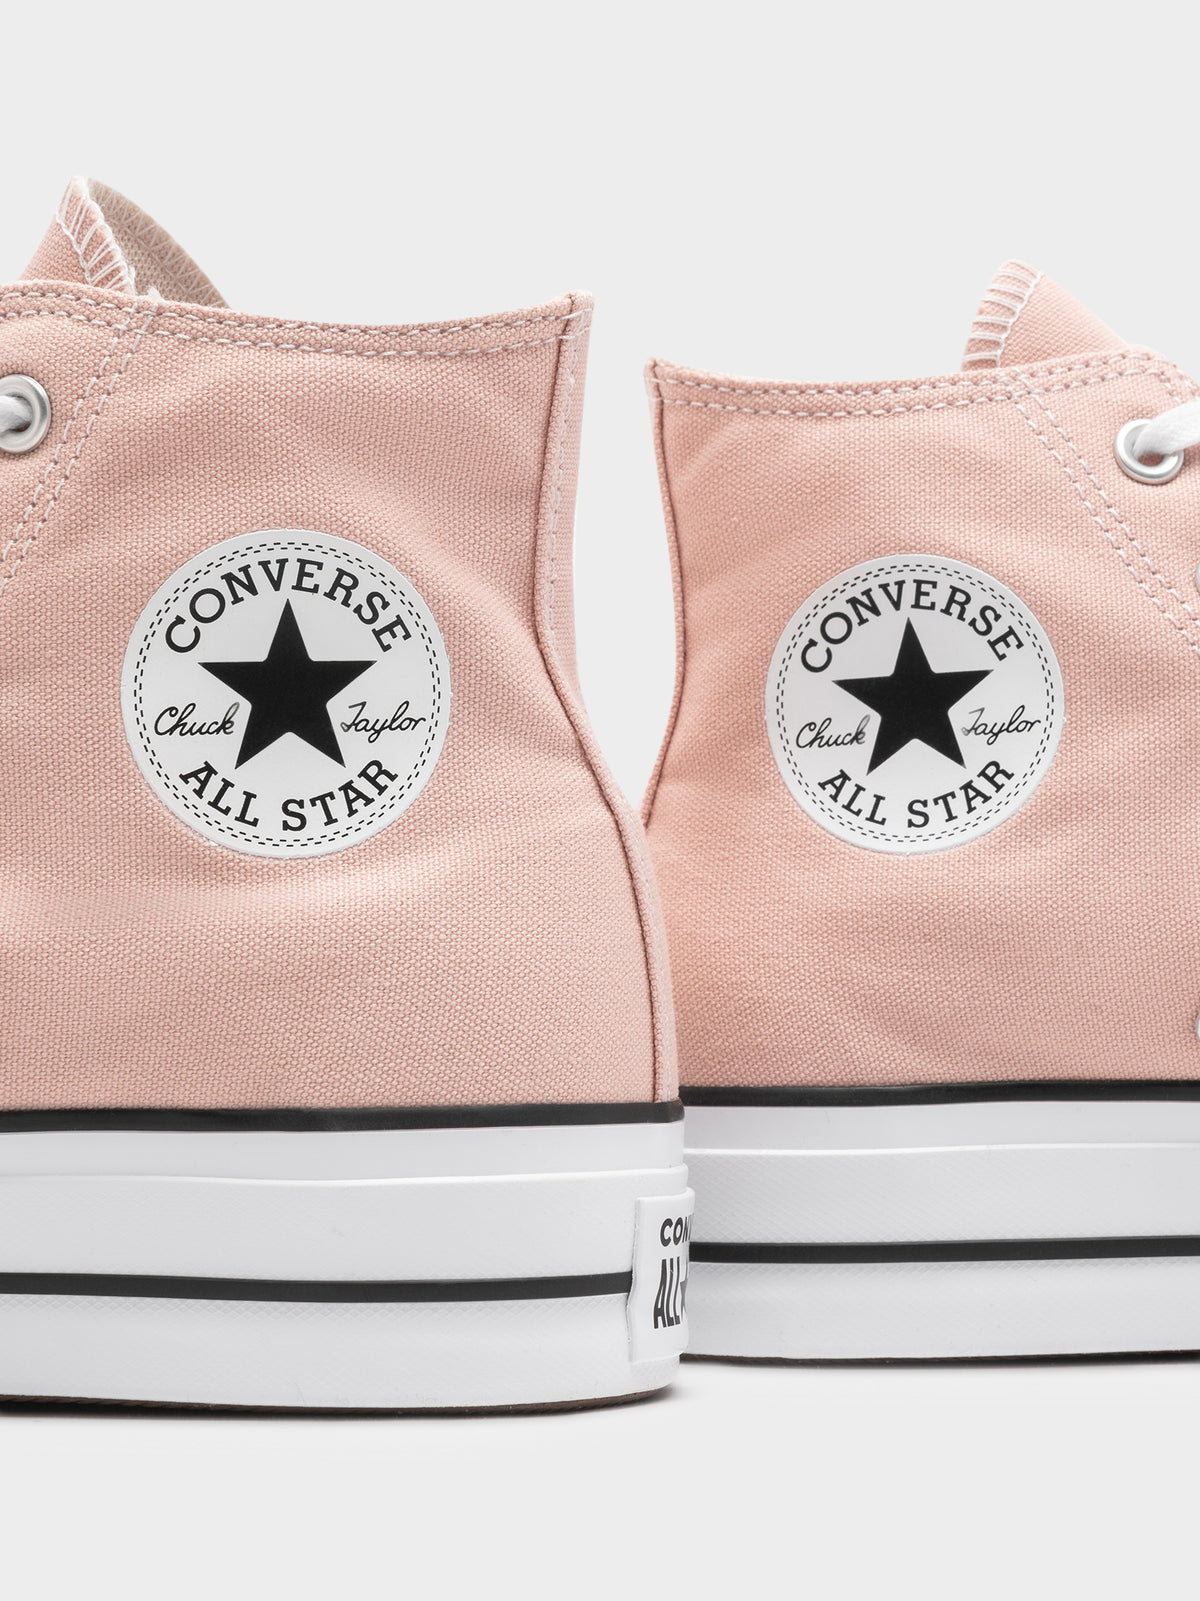 Womens CT All Star High Top in Pink &amp; White